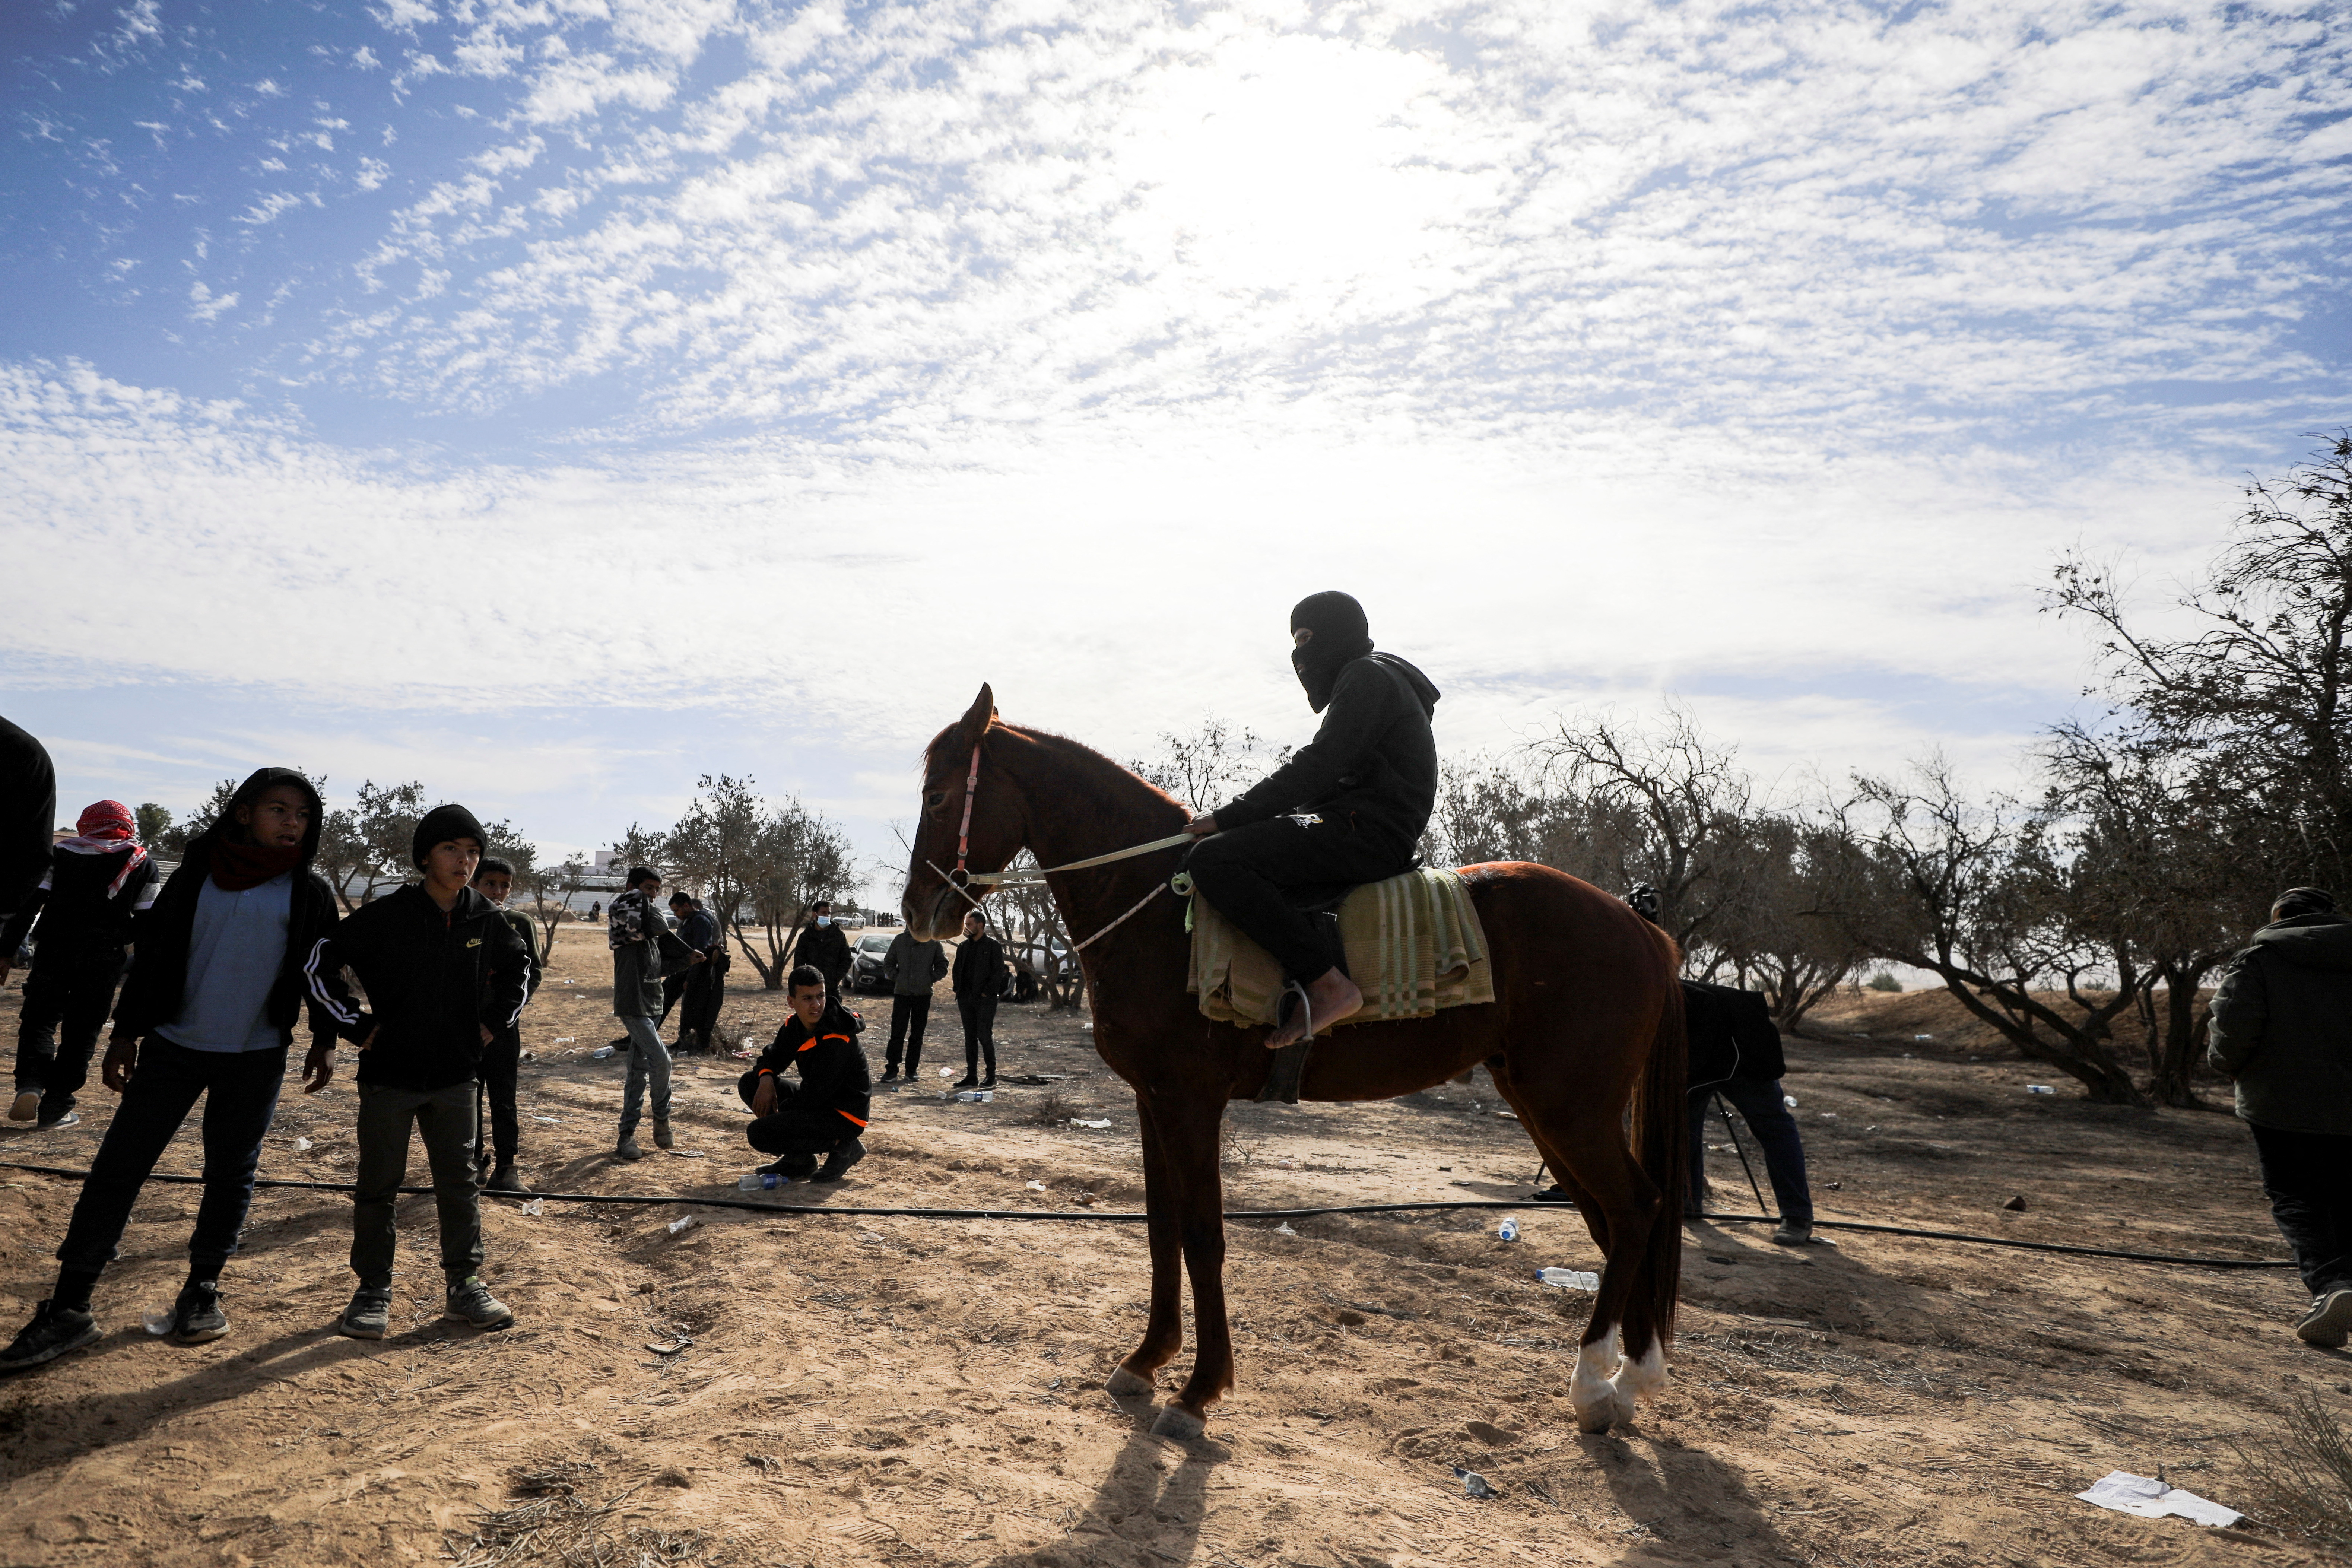 A Bedouin man sits on a horse as Bedouin children look on during a protest against forestation at the Negev desert village of Sawe al-Atrash, southern Israel